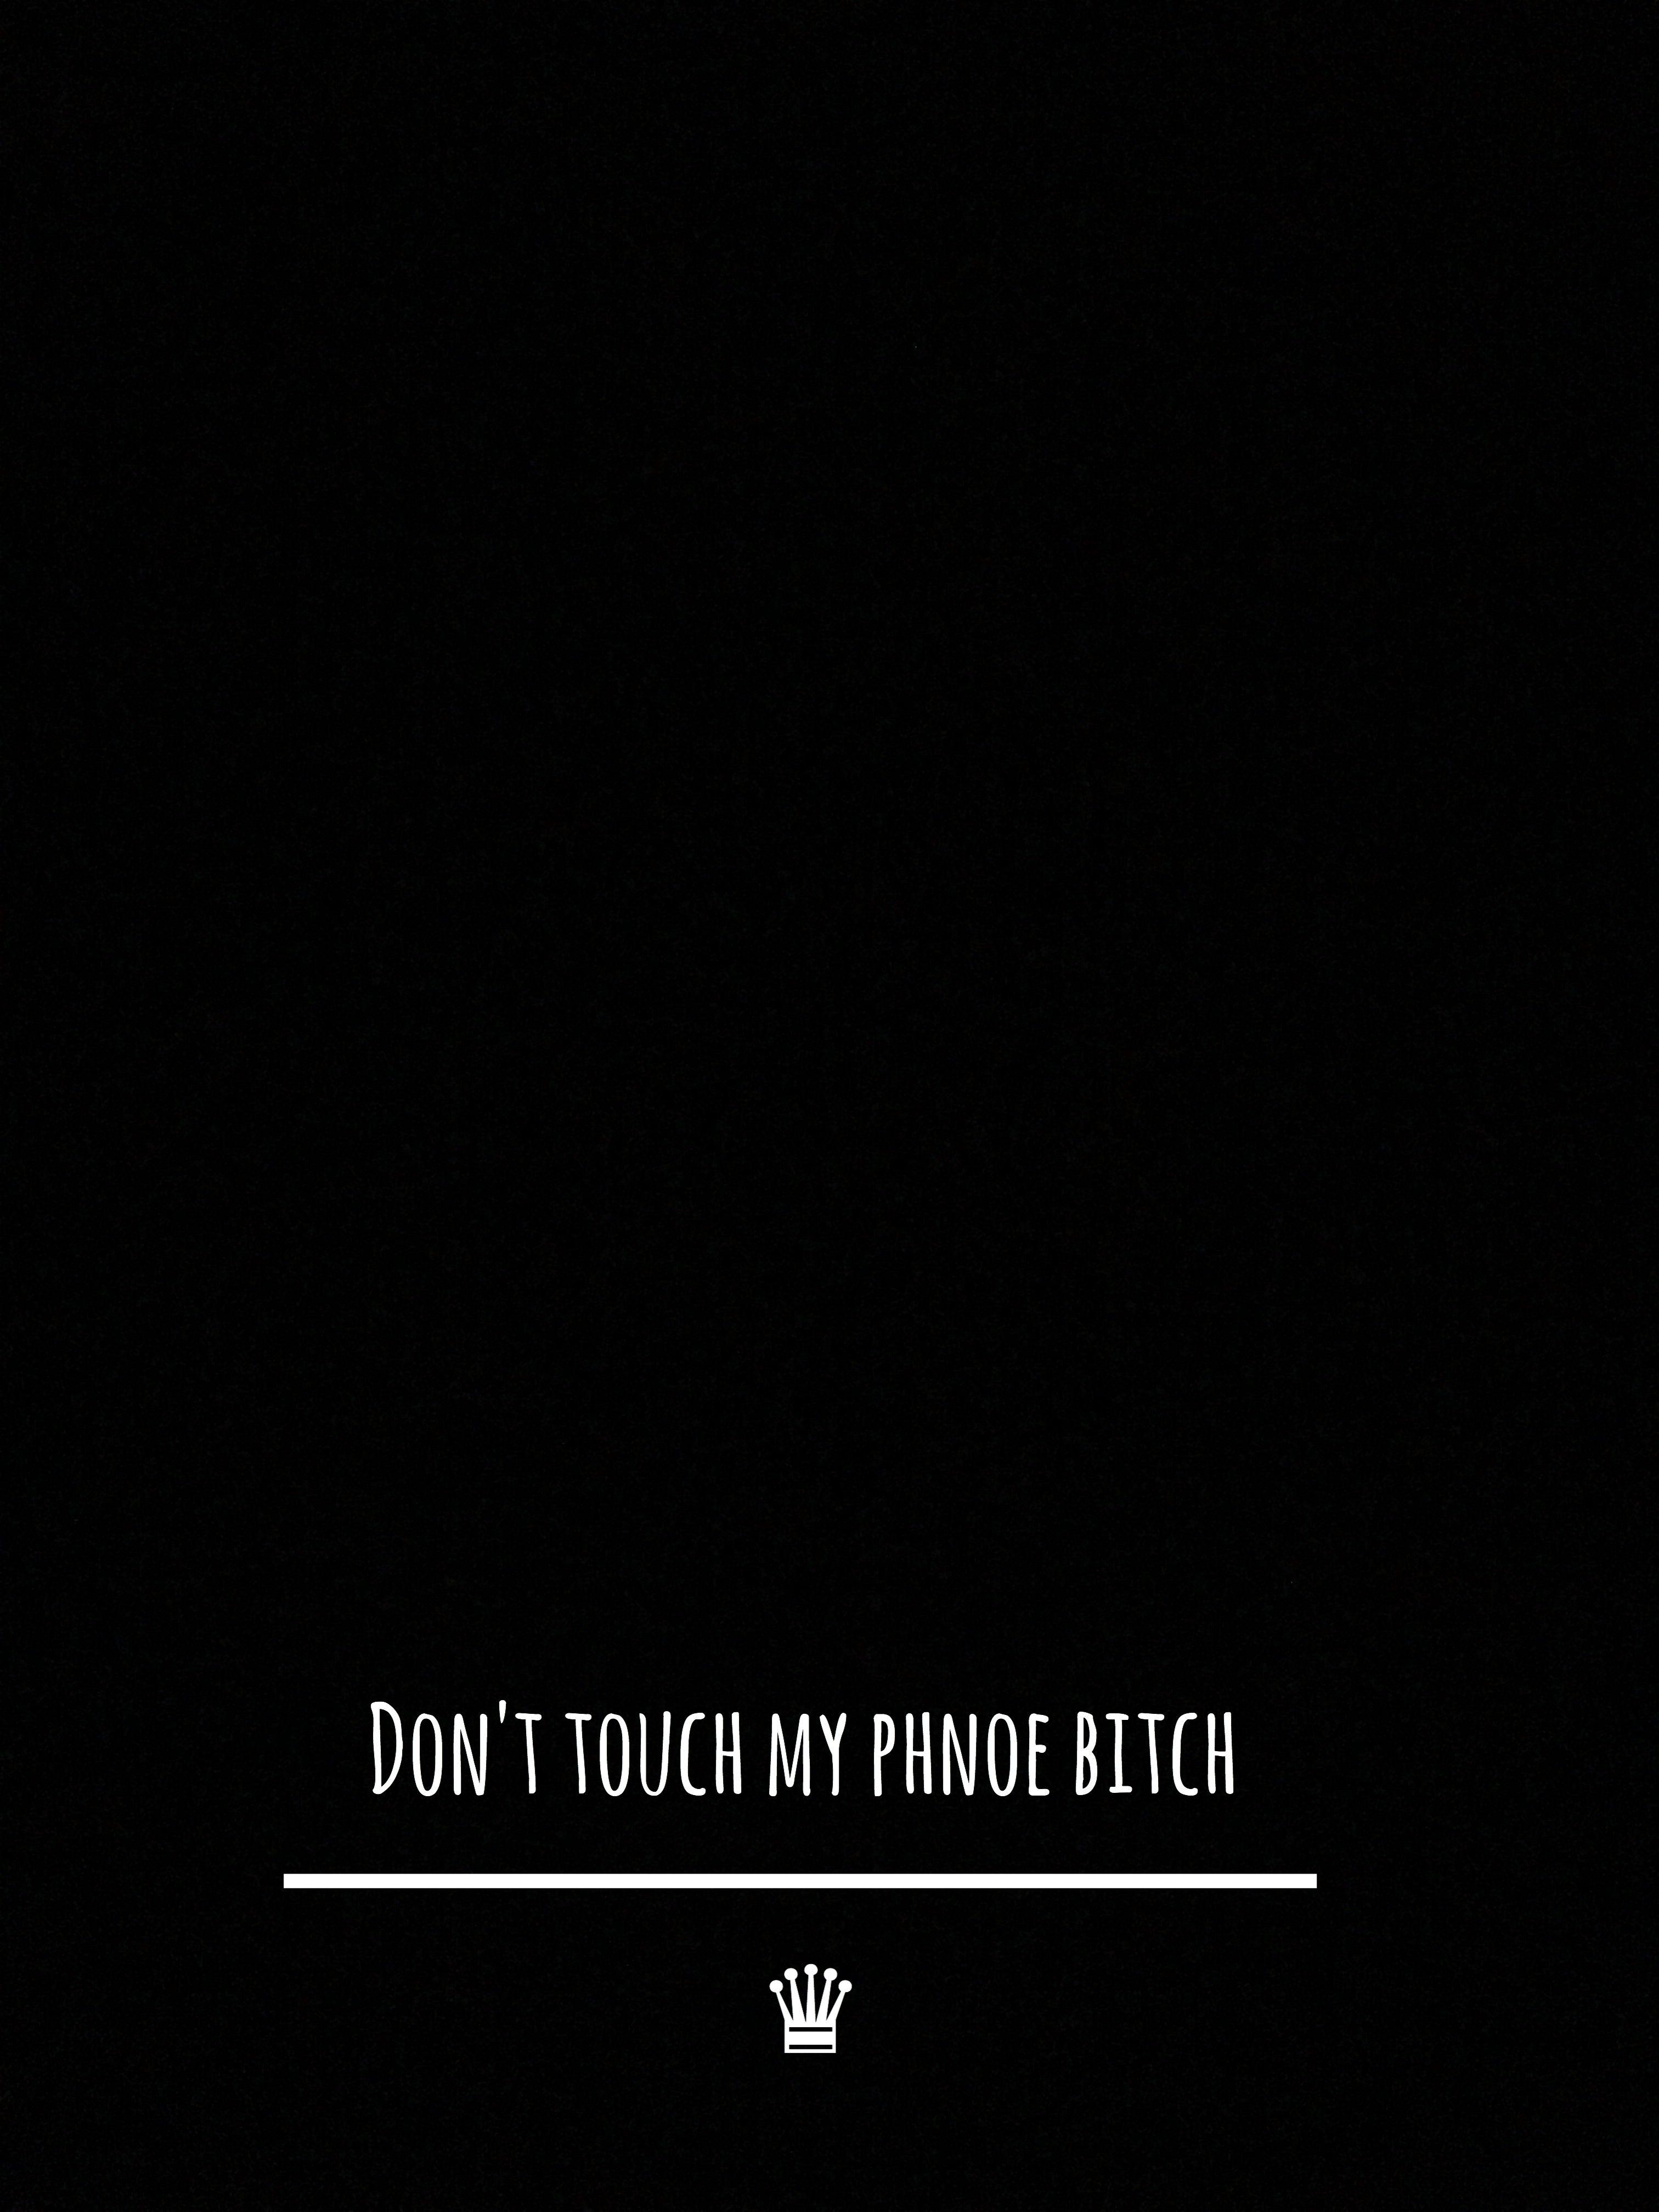 Don't Touch My Phone Hd Black Wallpapers - Wallpaper Cave